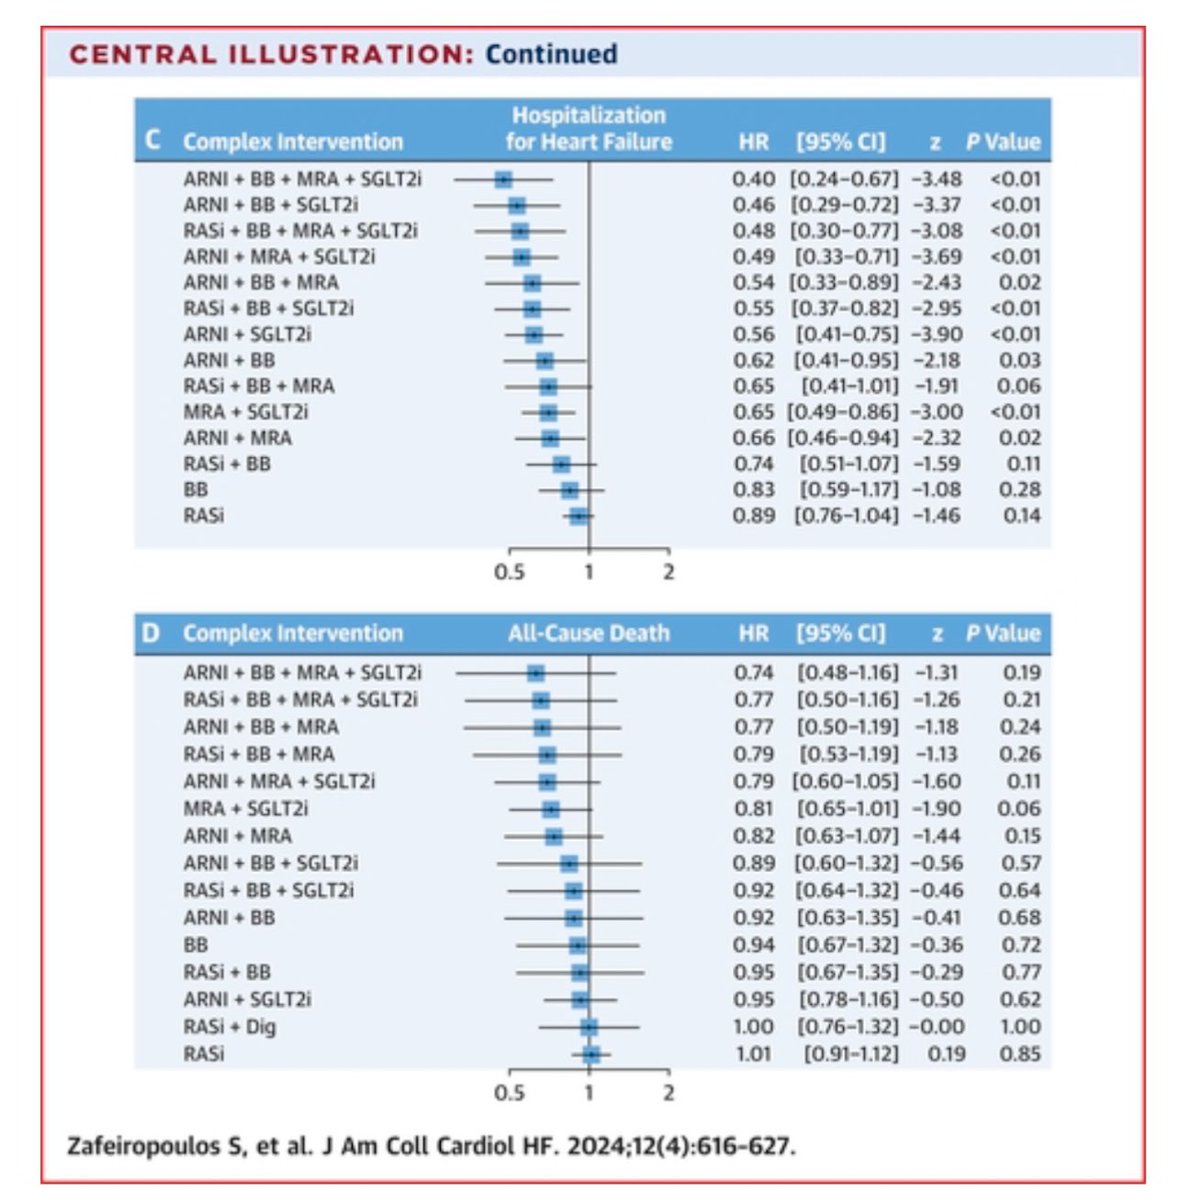 🔴 💊 Treatments in Heart Failure With Mildly Reduced and Preserved EF: 👥13 studies with a total of 29,875 mean LVEF of 56.3% 👉ARNI, MRA, & SGLT2i separately, ⬇️ primary composite outcome 🆚 placebo 👉 combination of ARNI, BB, MRA, and SGLT2i was the most effective…